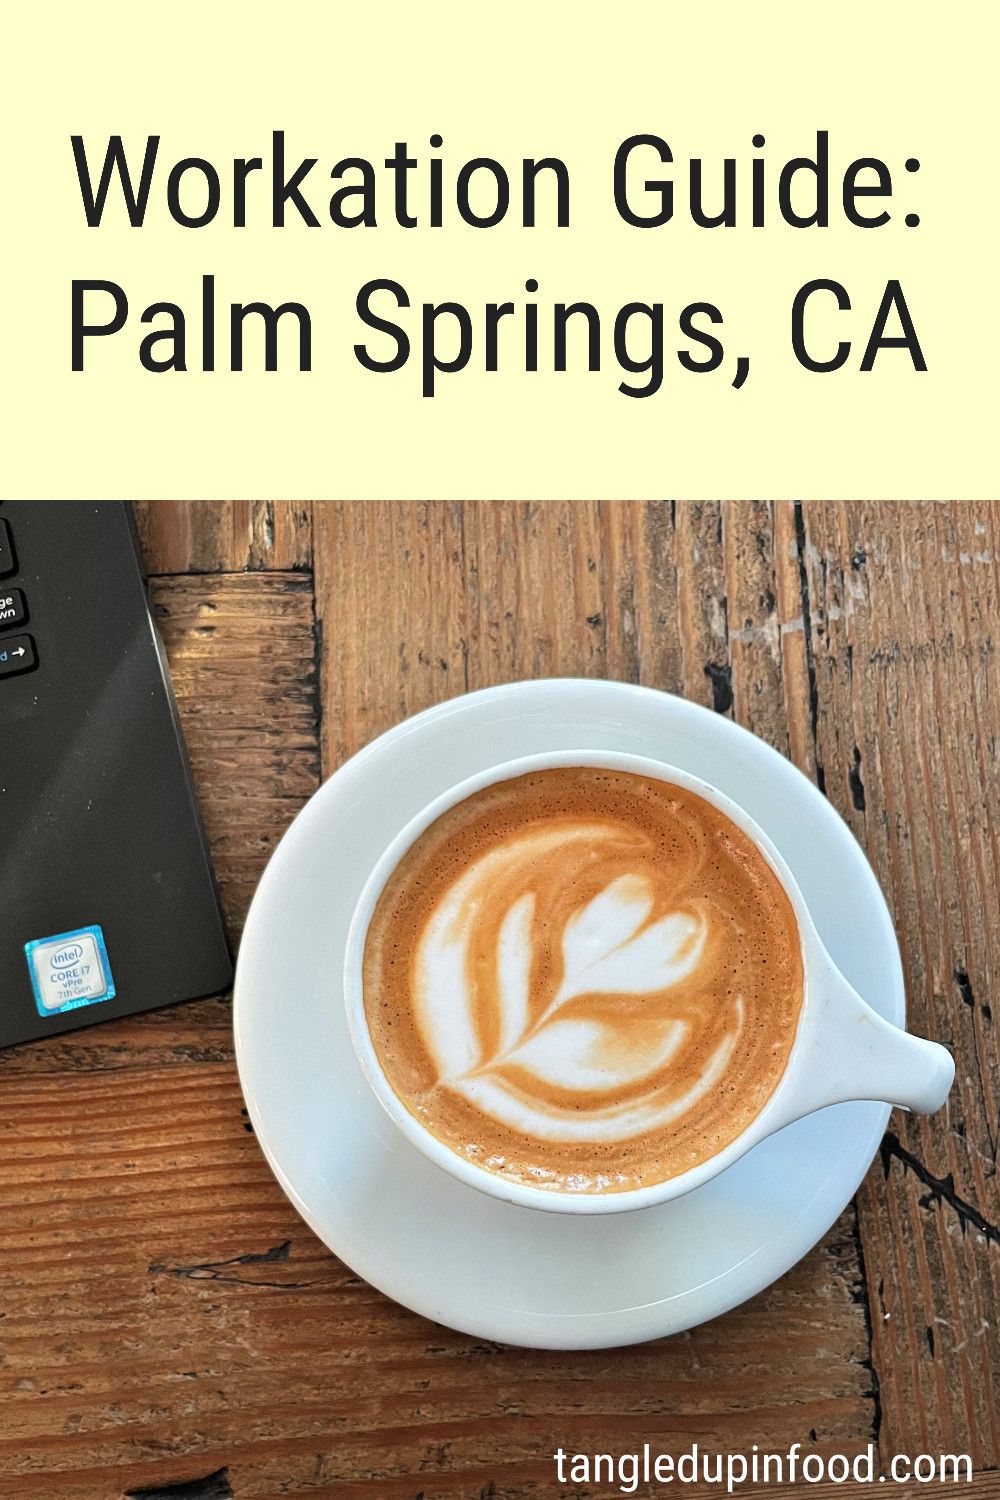 Photo of cappucino and text reading "Workation Destination: Palm Springs, CA"